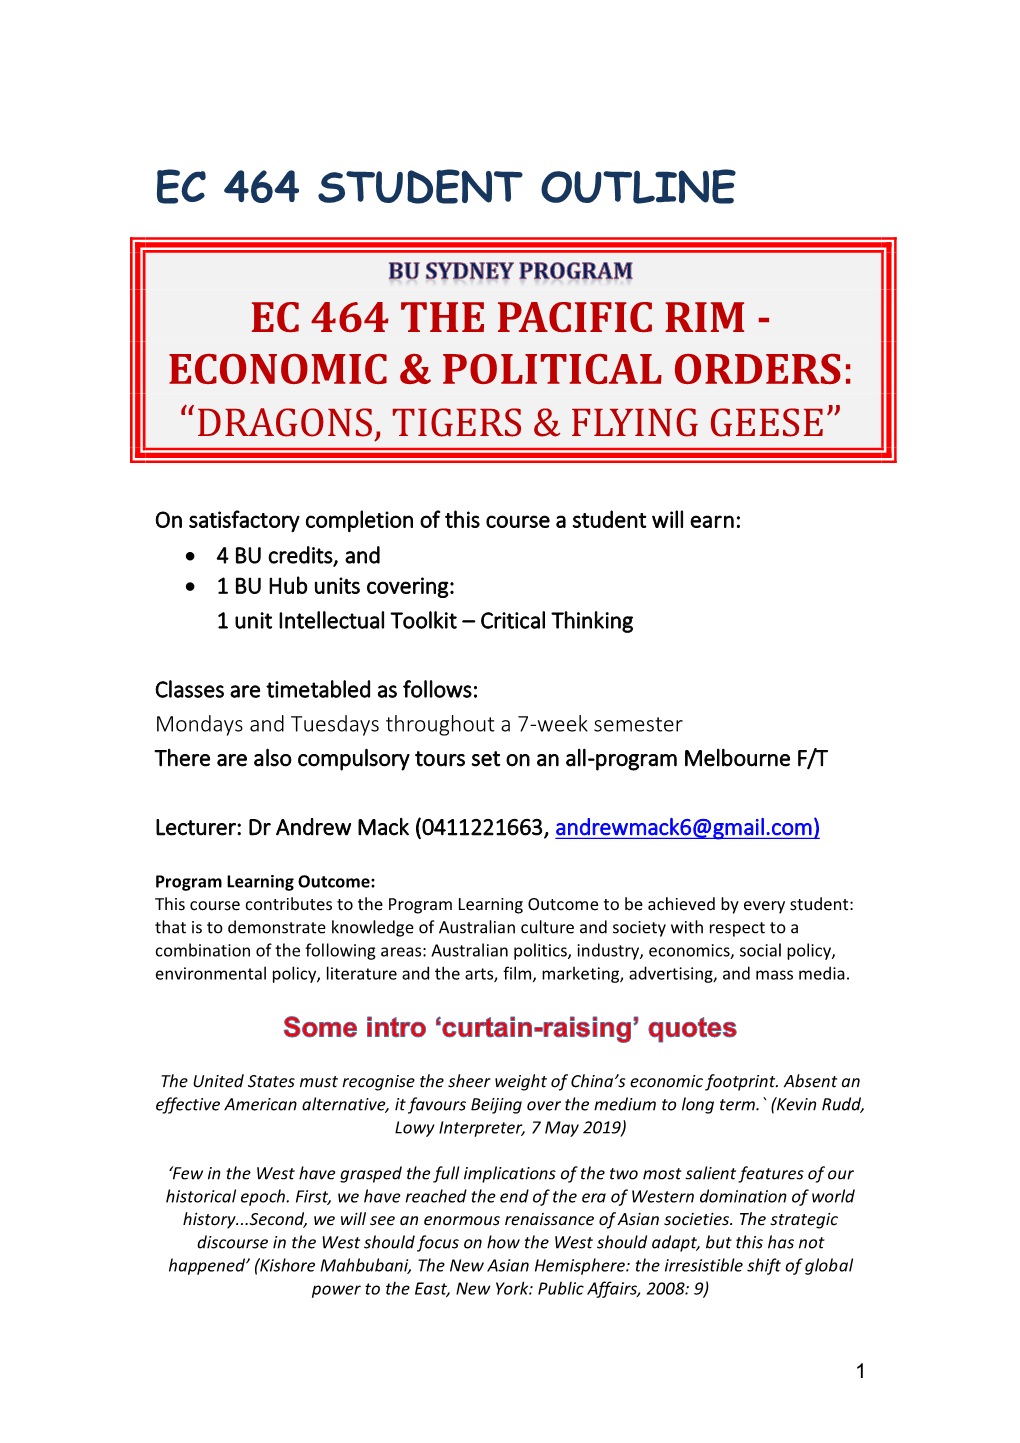 Ec 464 the Pacific Rim - Economic & Political Orders: “Dragons, Tigers & Flying Geese”